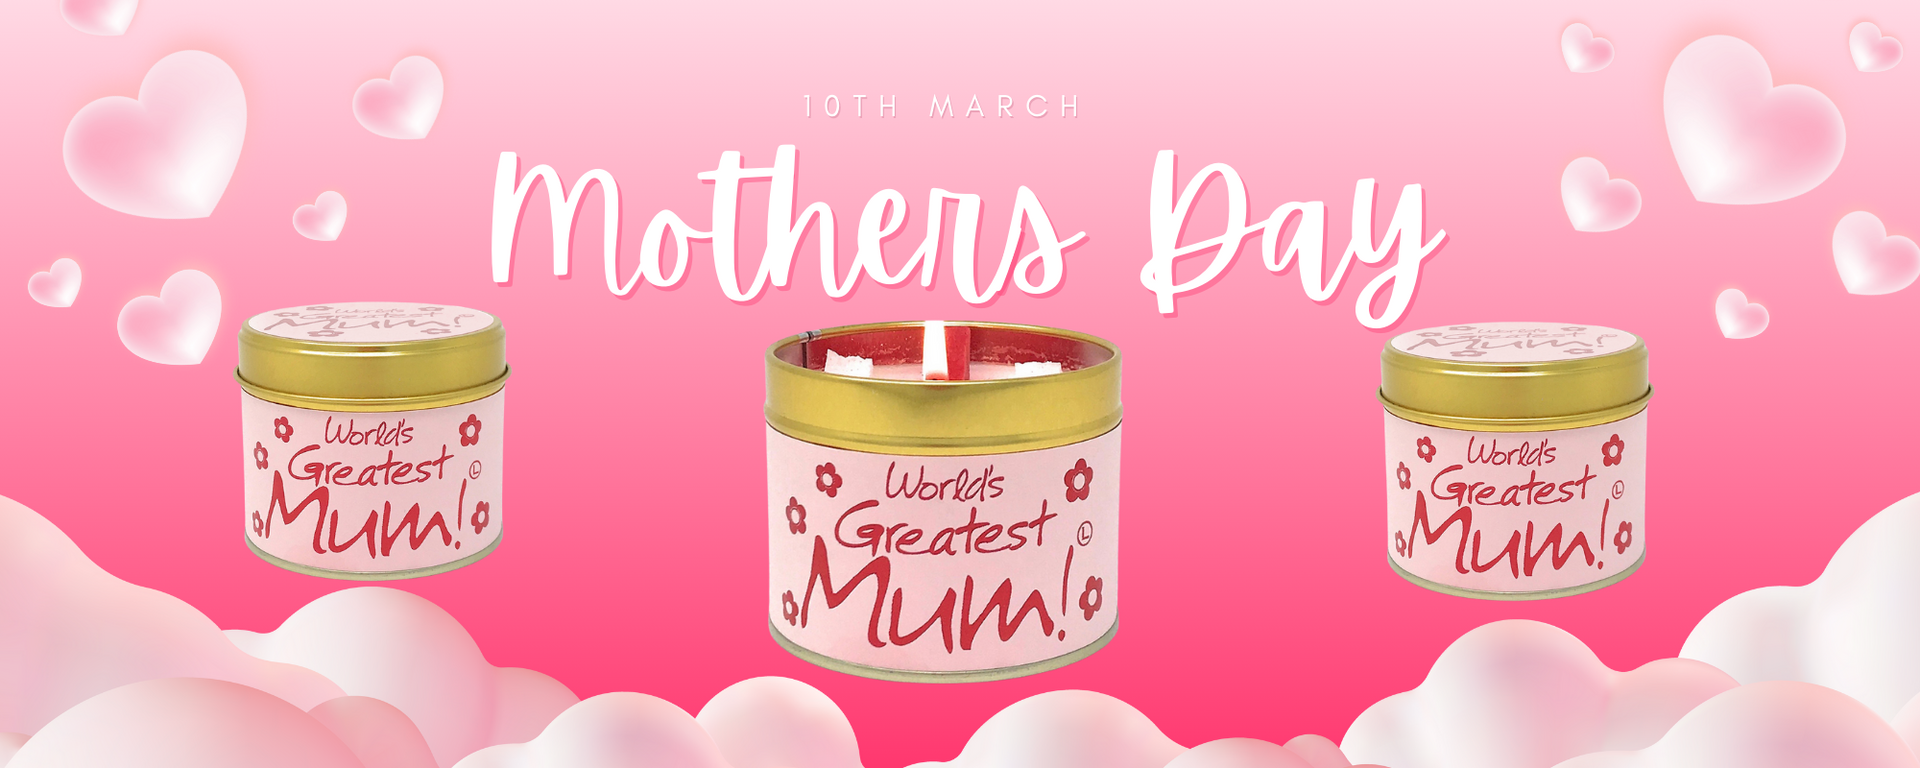 Mothers Day Gifting